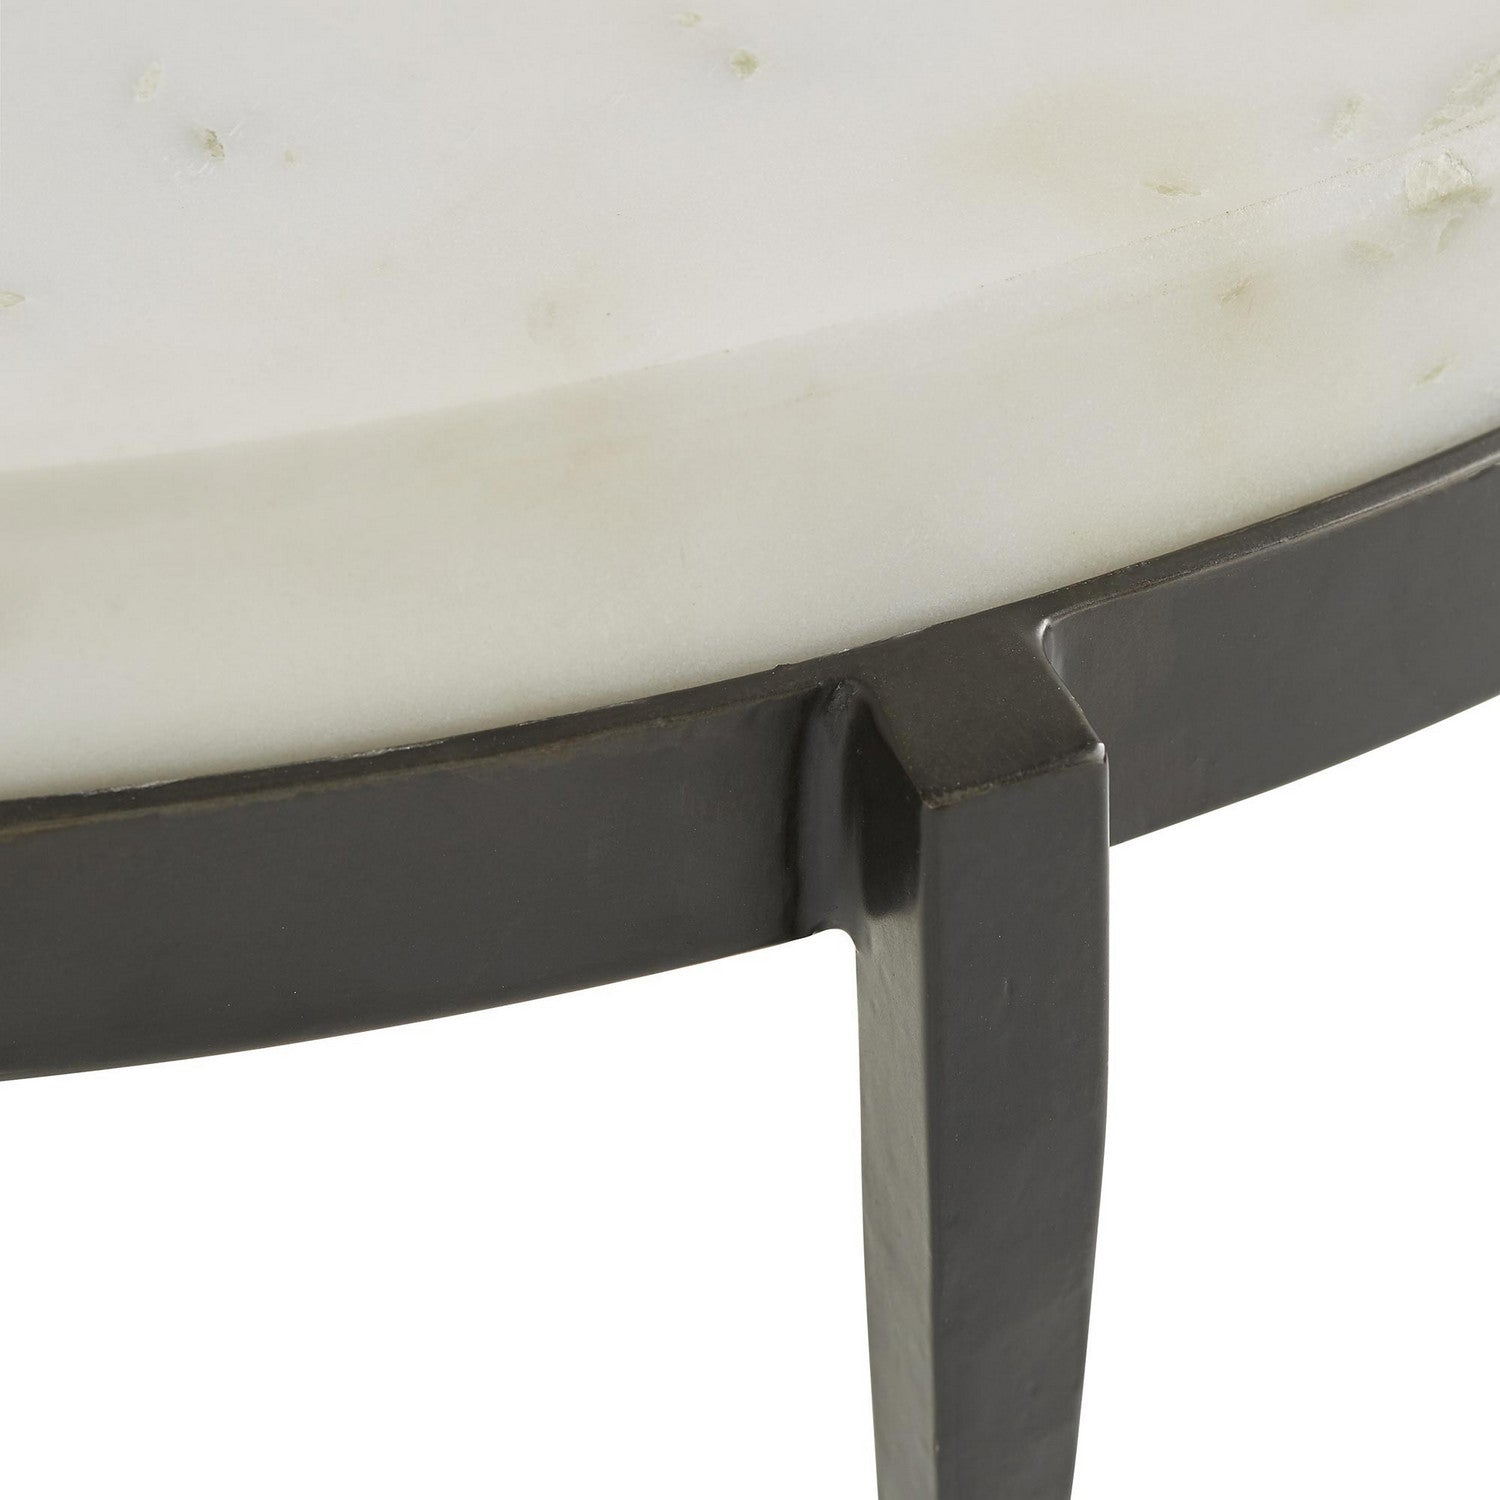 Cocktail Table from the Kelsie collection in Black finish